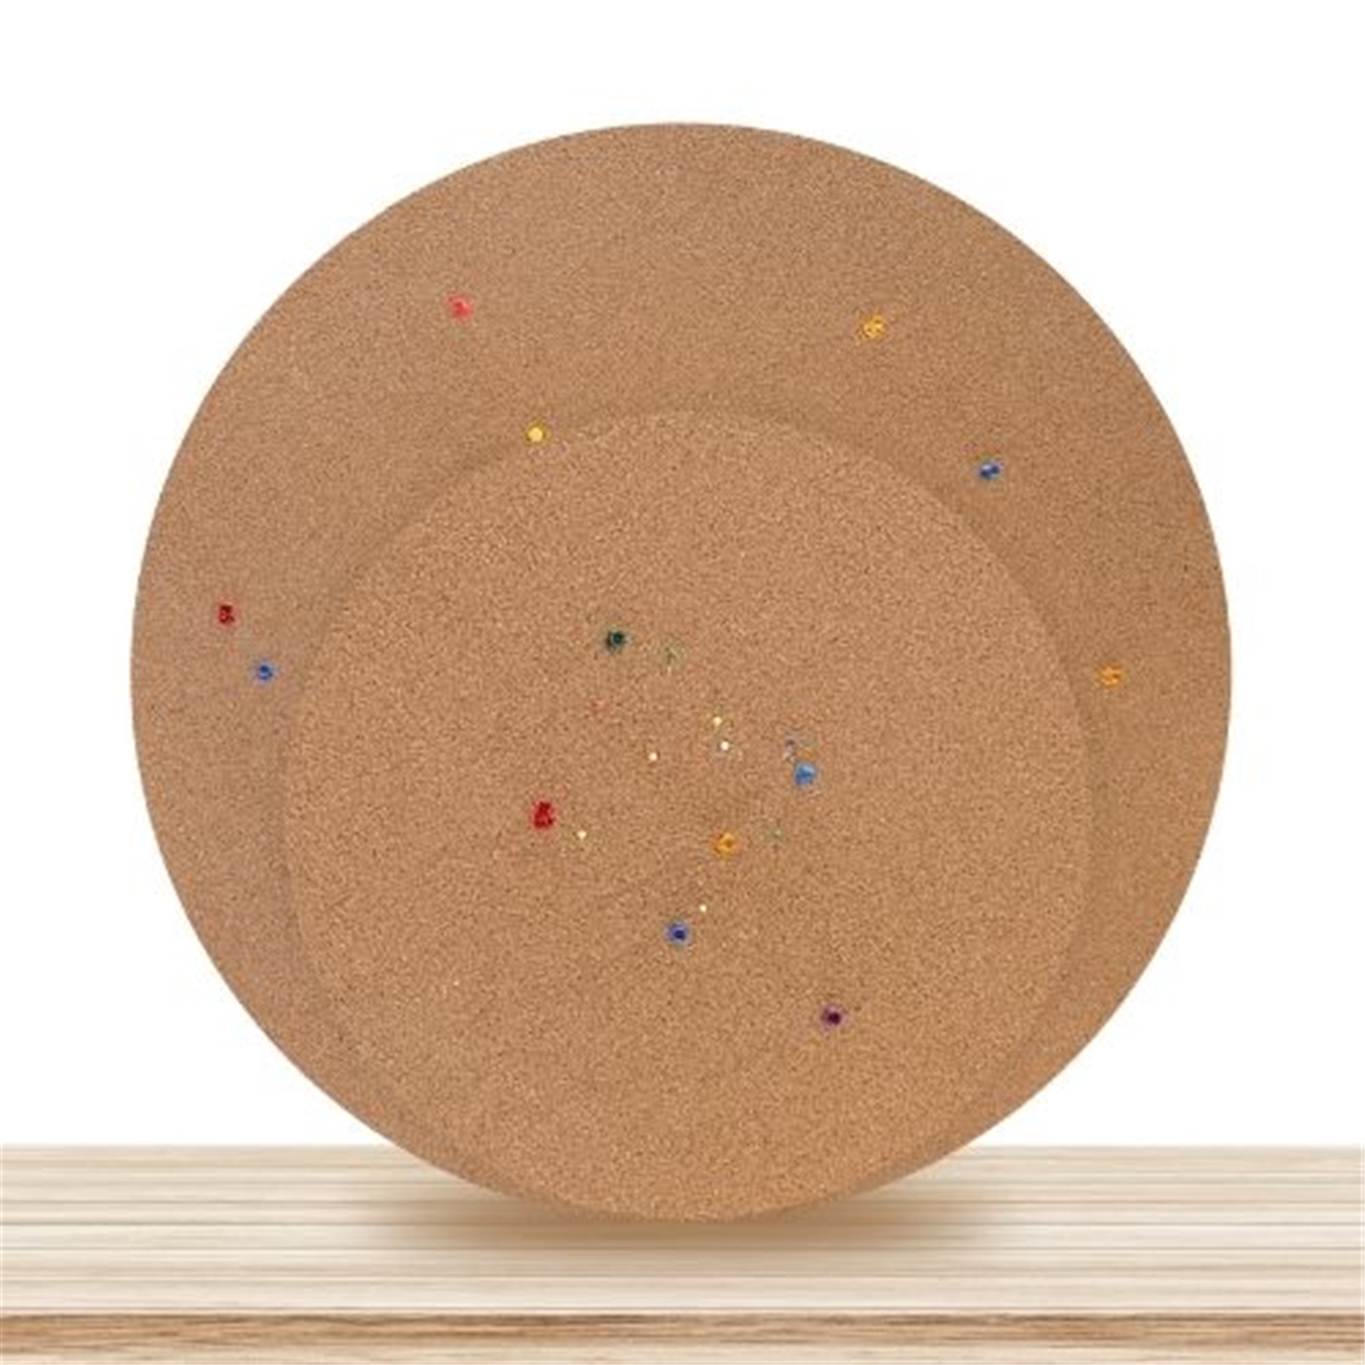 Custom Cut Round Cork Circles - Solid Backing - Make Any Size To 36